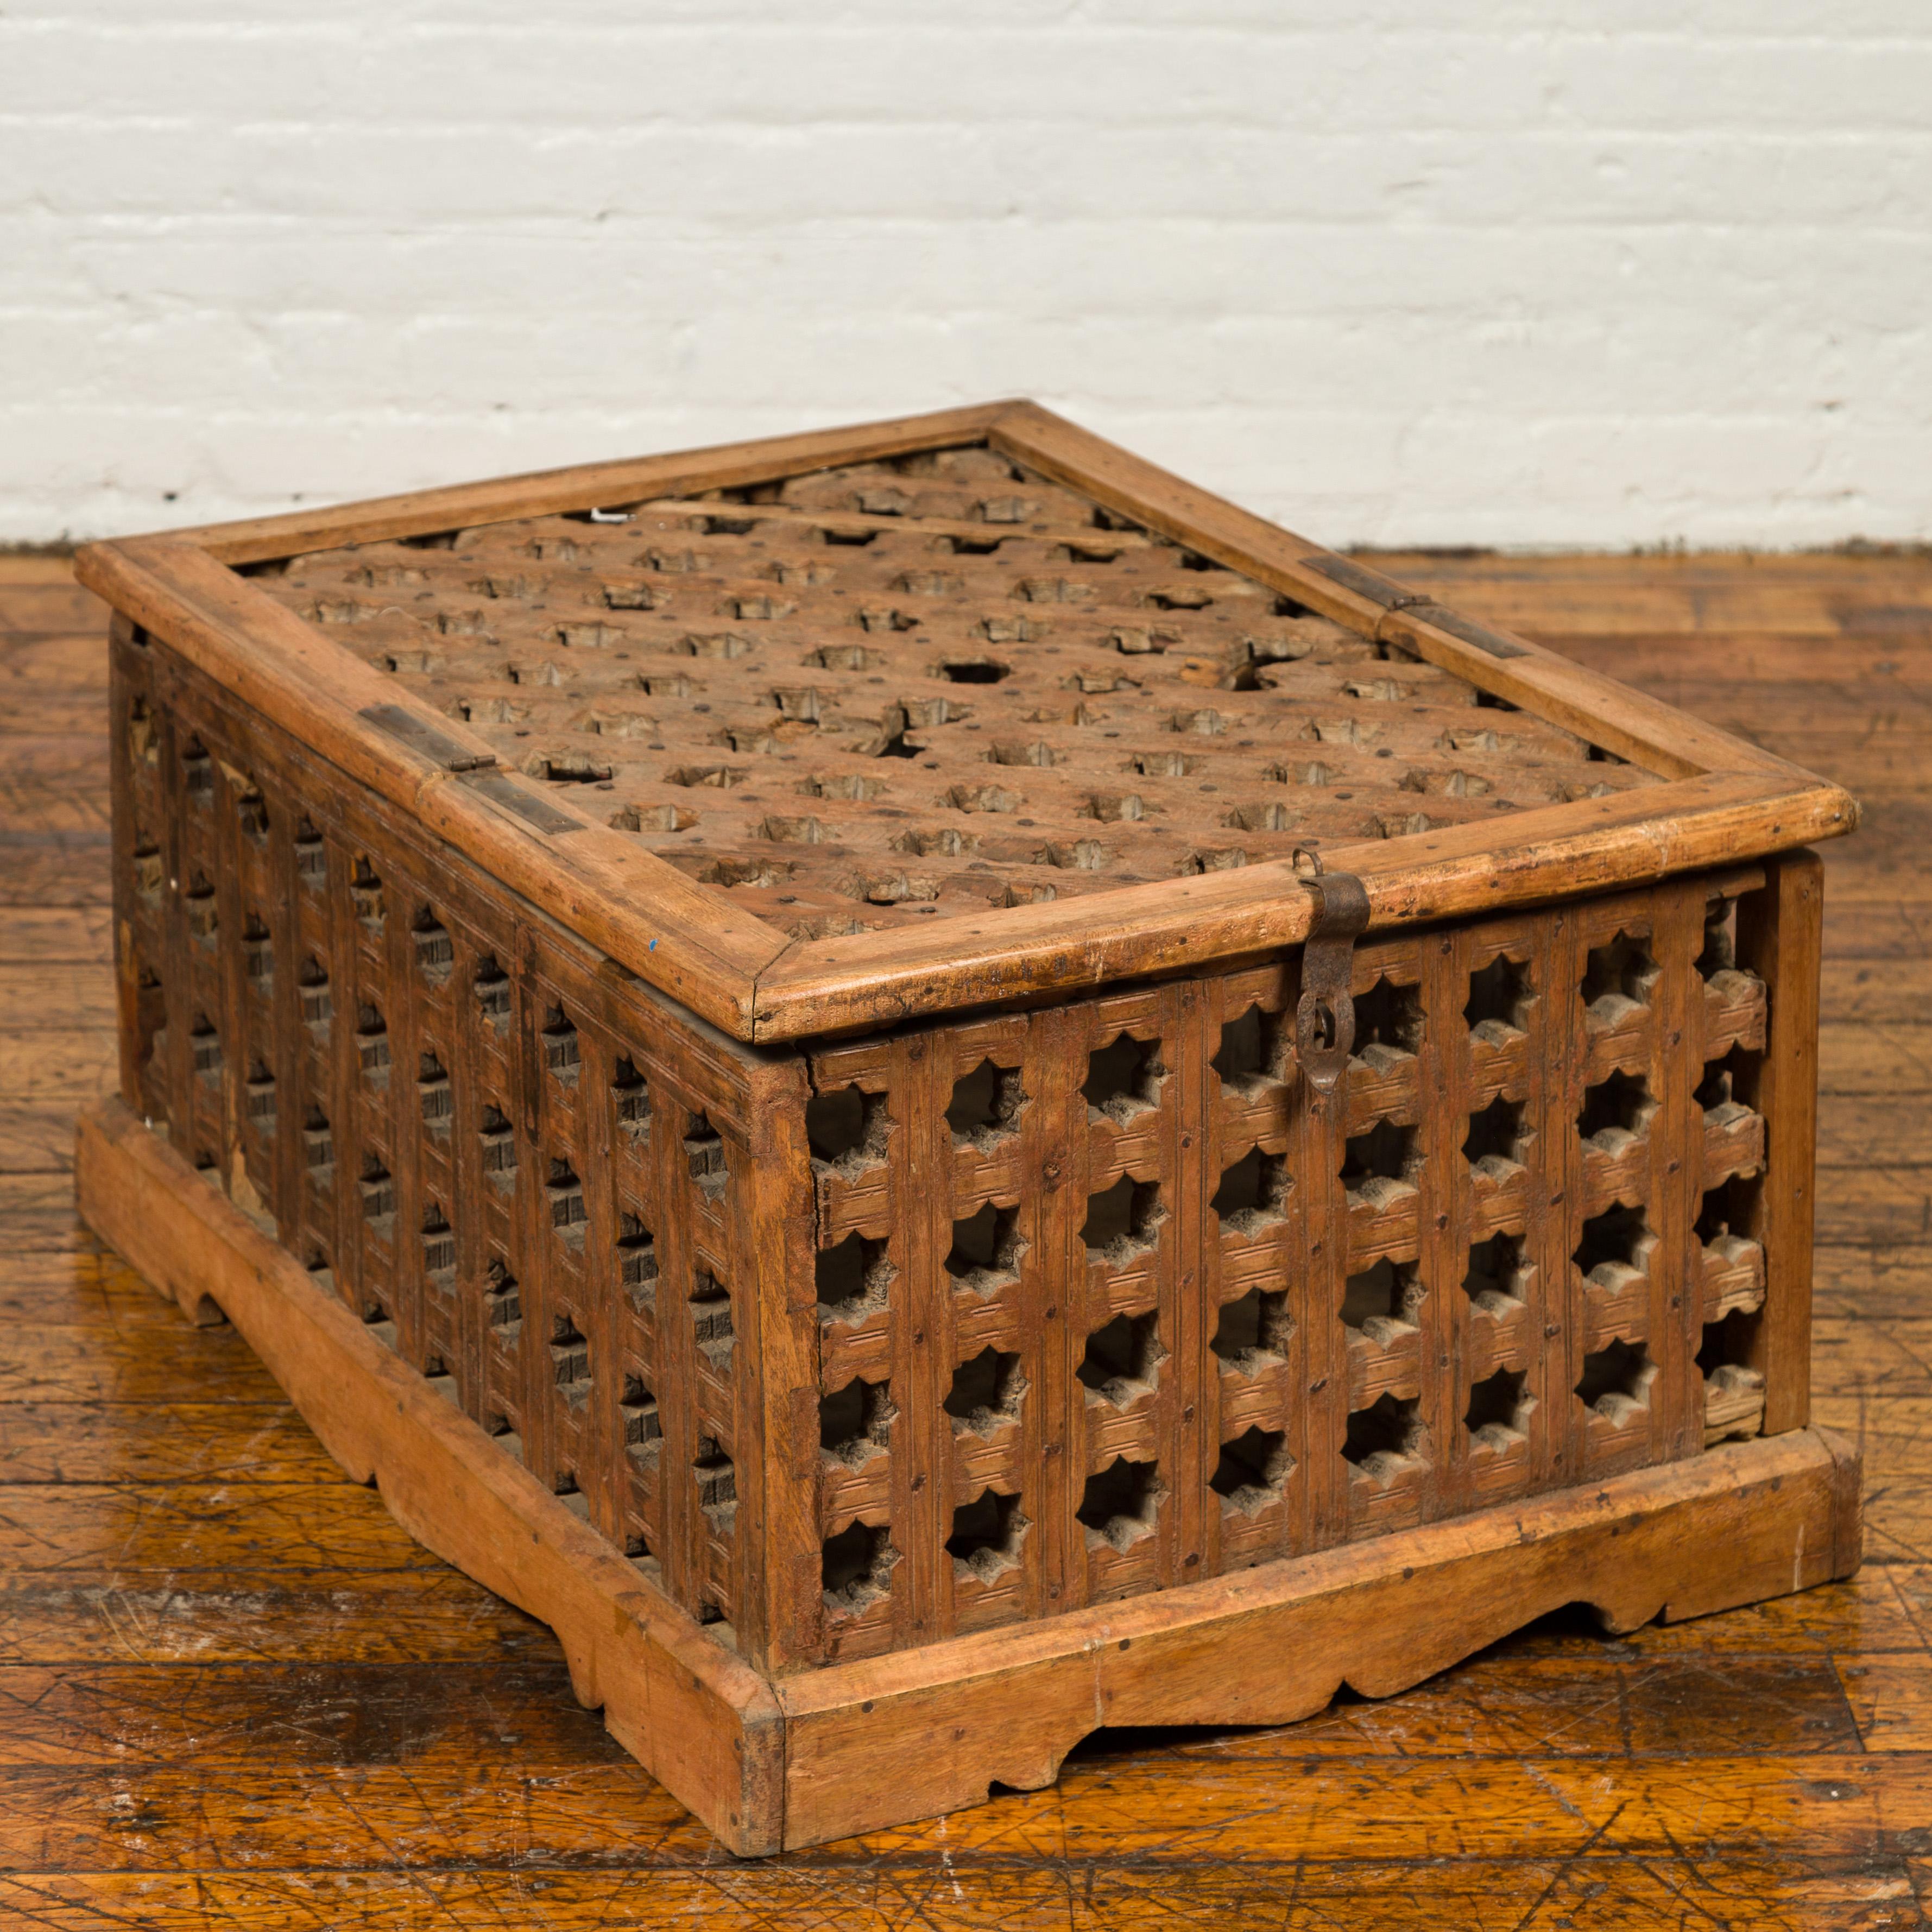 Rustic Indian Antique Food Box with Pierced Star Motifs and Bracketed Plinth For Sale 5